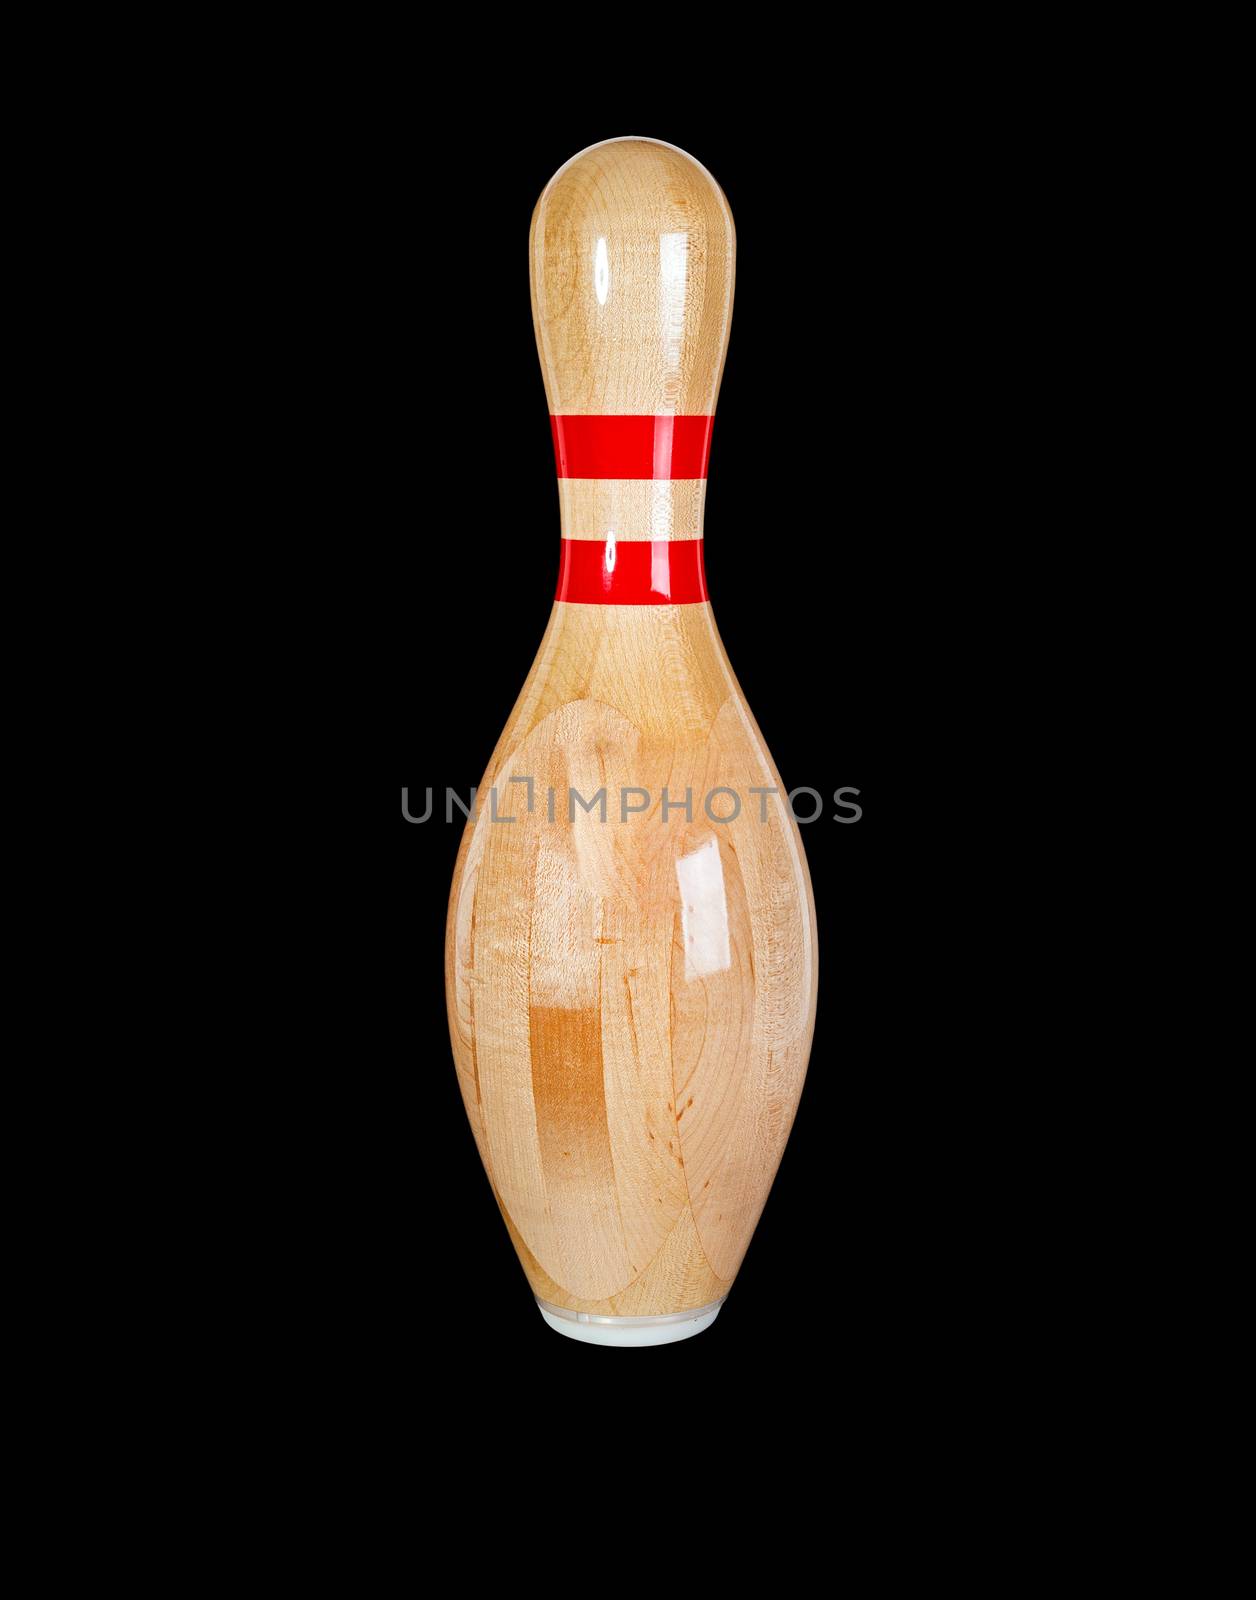 Wooden pin for bowling isolated on a black background by 977_ReX_977